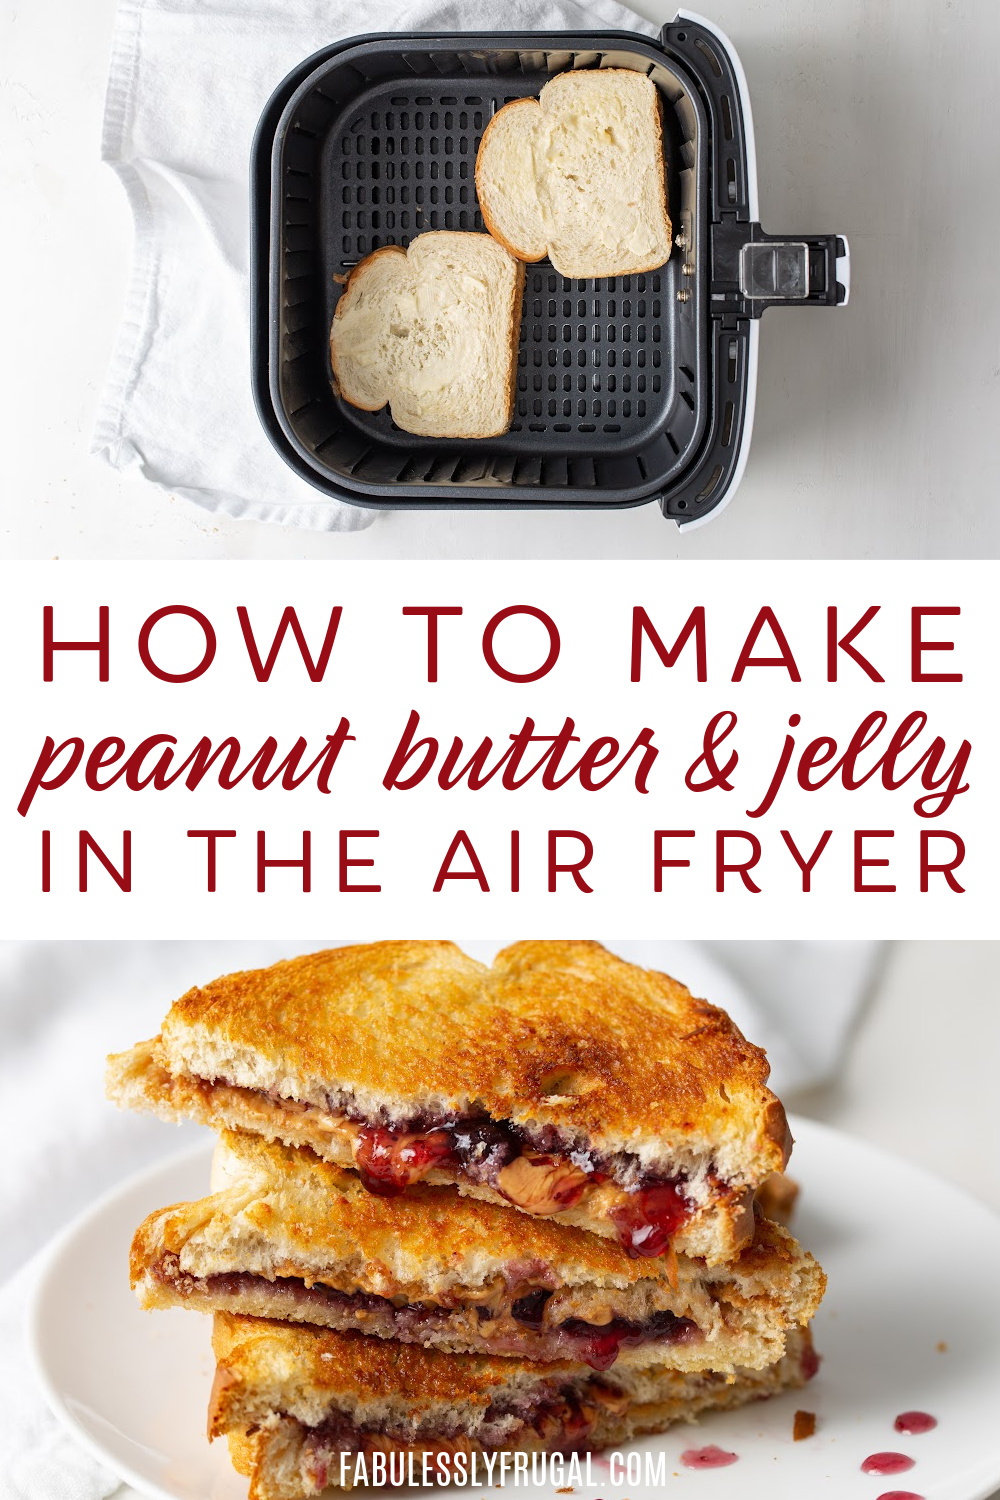 how to make peanut butter & jelly in the air fryer